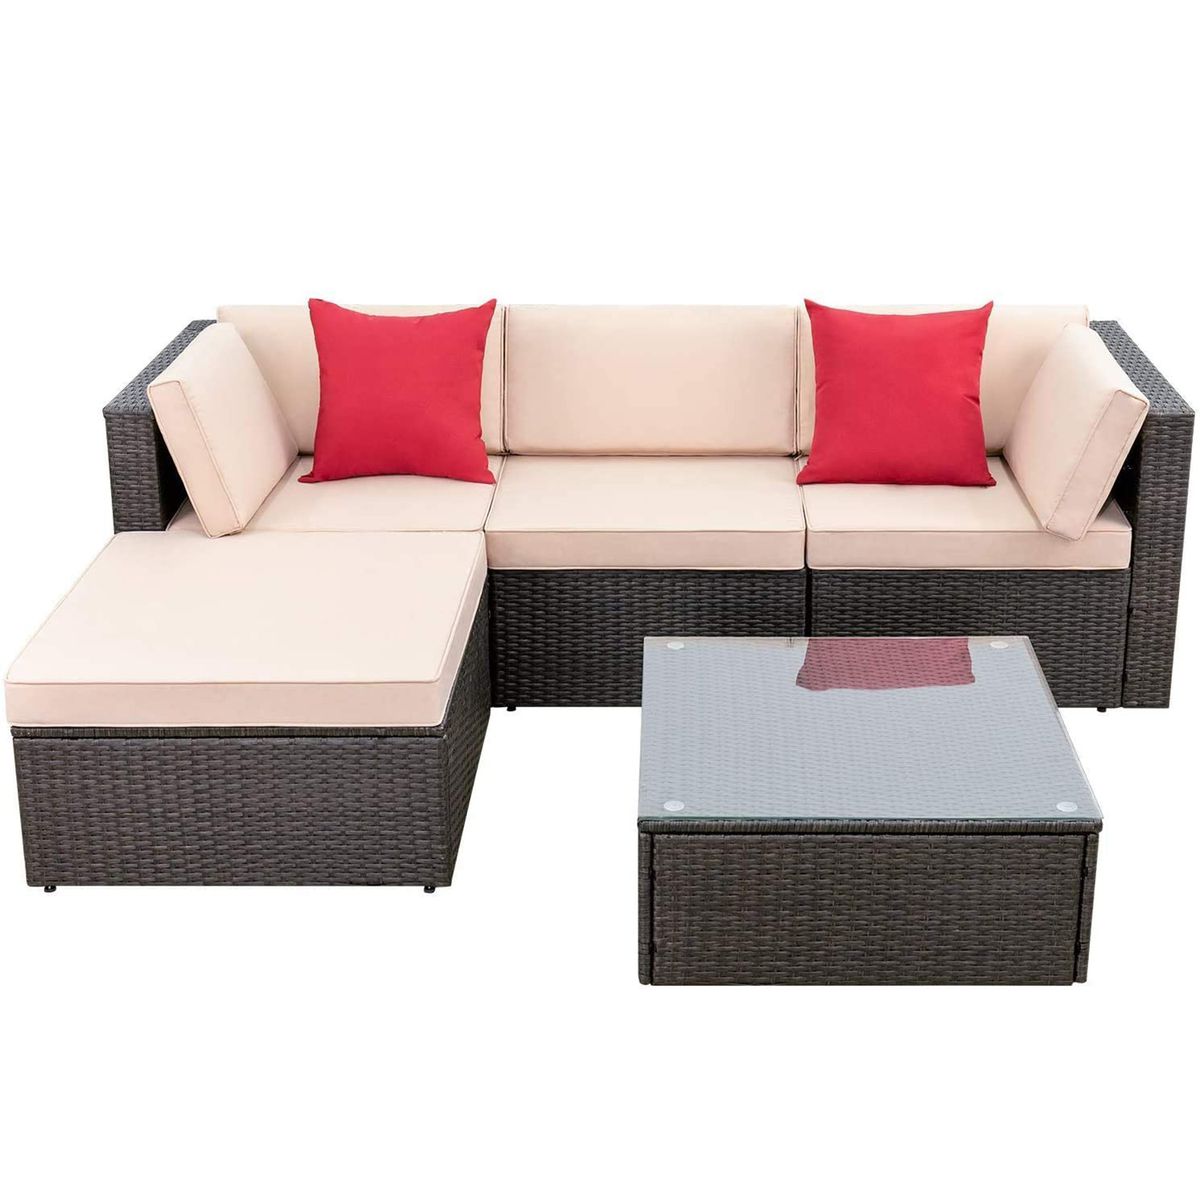 Devoko 5 Pieces Patio Furniture Sets All Weather Outdoor Sectional Sofa